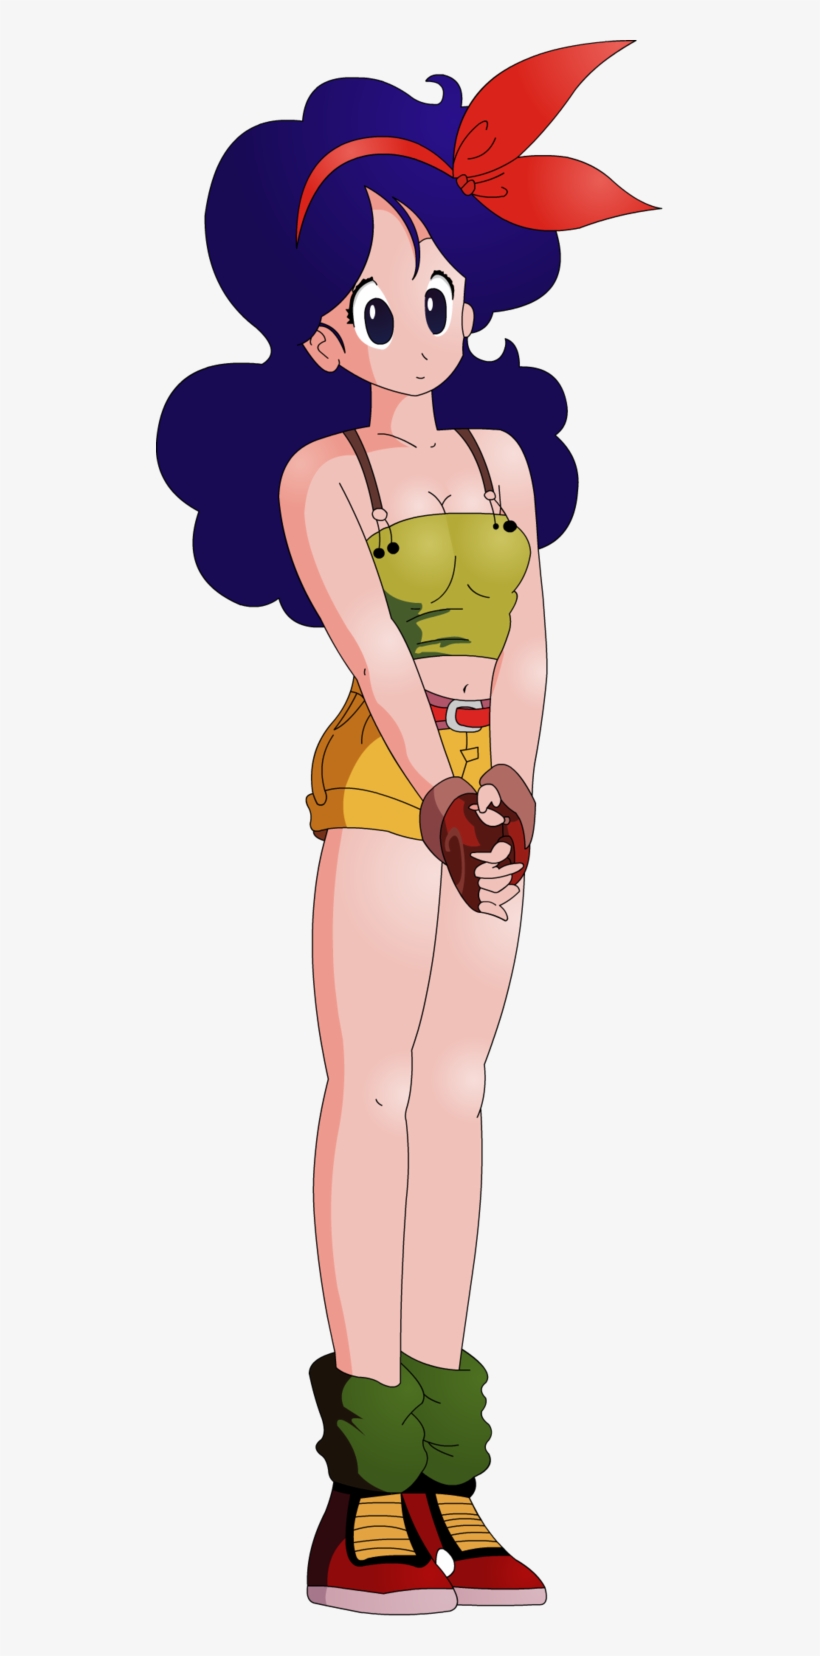 Launch By Afe231-d4u810j - Lunch Dragon Ball Png, transparent png #2391827